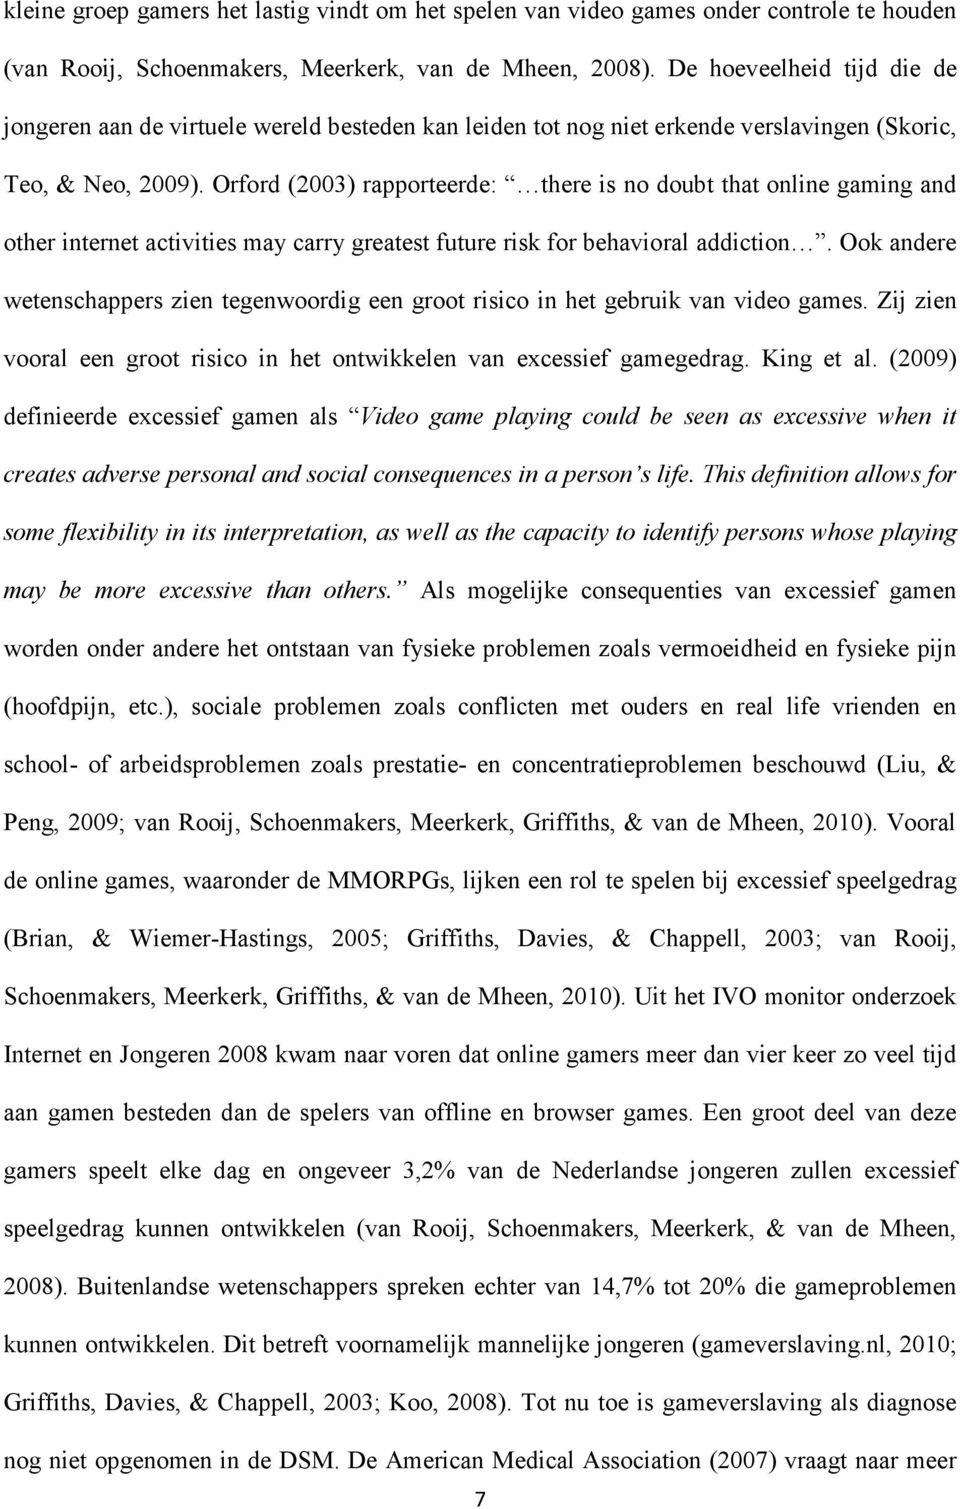 Orford (2003) rapporteerde: there is no doubt that online gaming and other internet activities may carry greatest future risk for behavioral addiction.